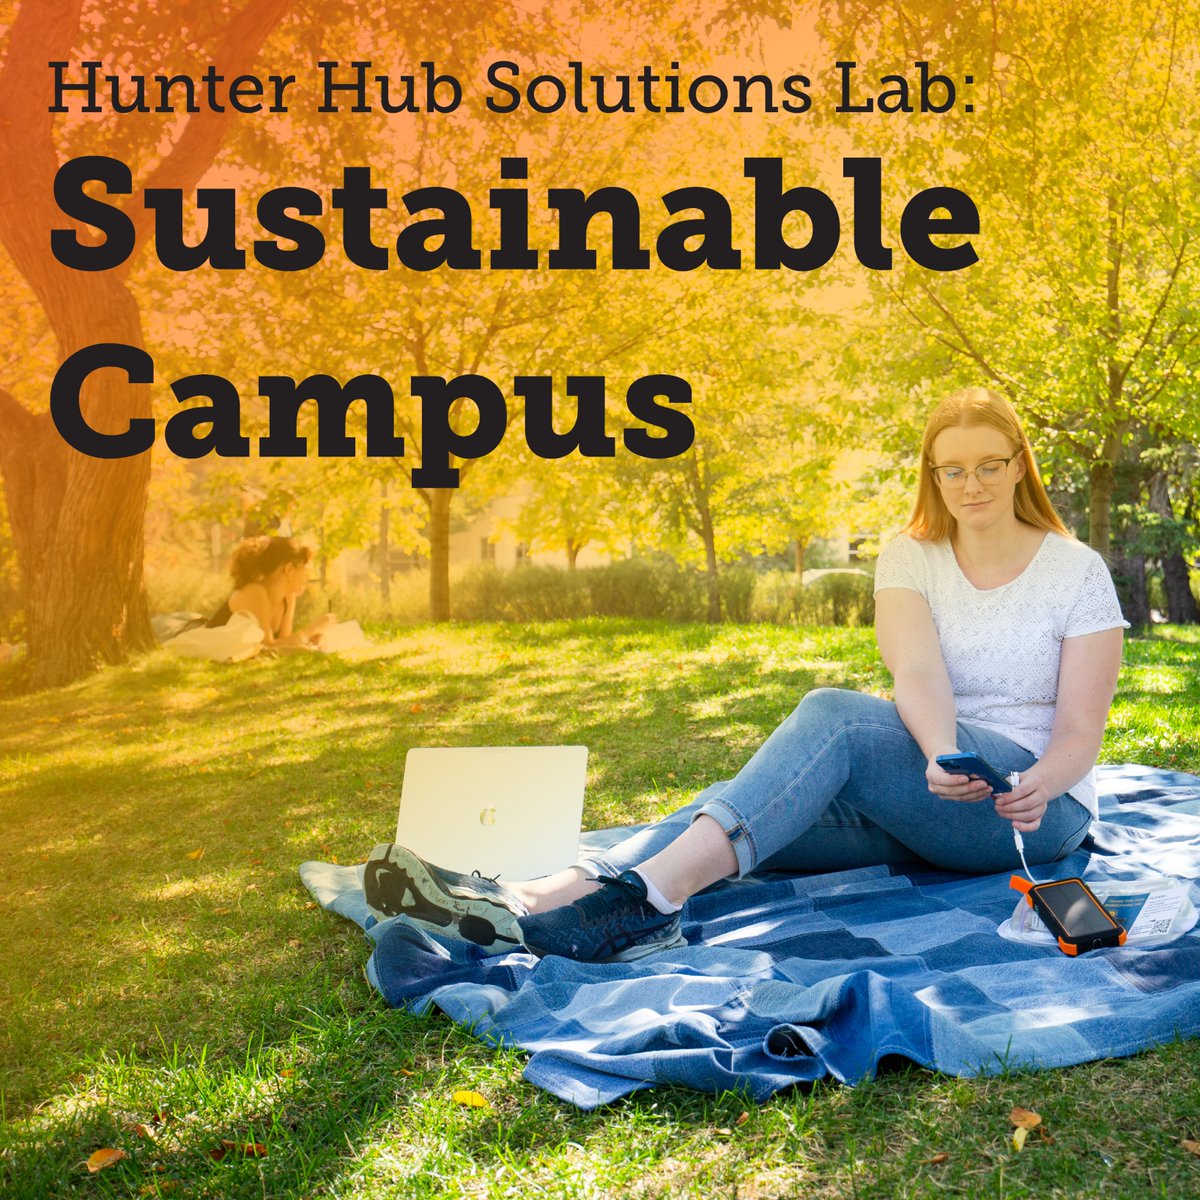 Today the Hunter Hub Solutions Lab: Sustainable Campus challenge kicks off! We can’t wait to guide participants through this impactful and transformative challenge and see what solutions emerge from it. For more information about the Hunter Hub, visit ucalgary.ca/hunter-hub!